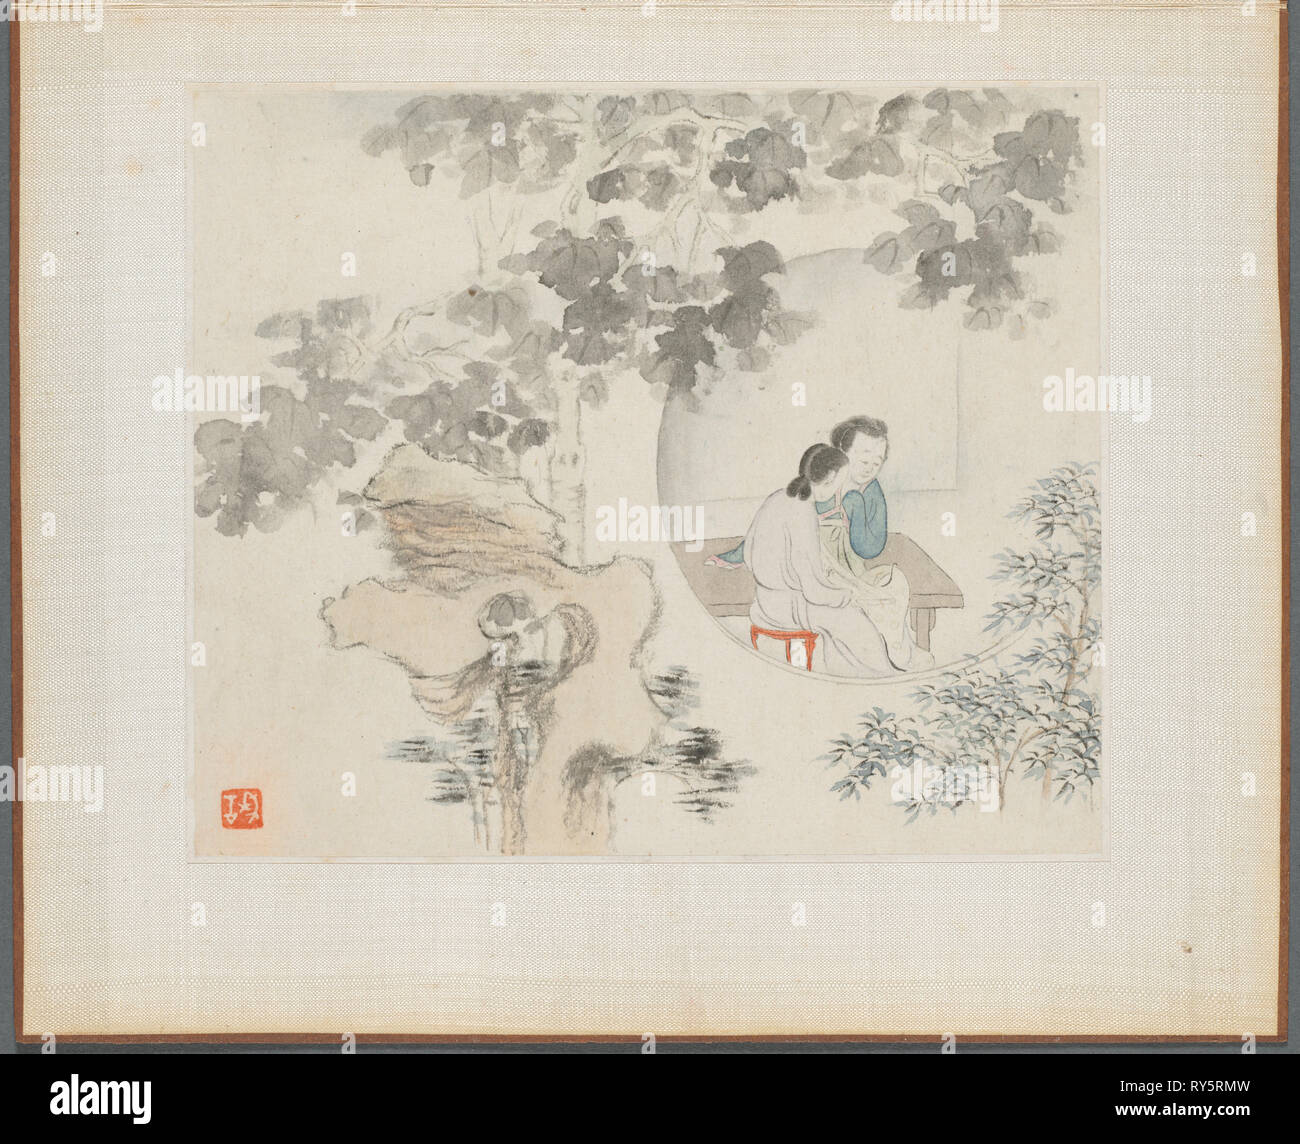 Album of Landscape Paintings Illustrating Old Poems: Two Women Sit at a Table within a Circle Visible in a Landscape, 1700s. Hua Yan (Chinese, 1682-about 1765). Album leaf, ink and light color on paper; image: 11.2 x 13.1 cm (4 7/16 x 5 3/16 in.); album, closed: 15 x 18.5 cm (5 7/8 x 7 5/16 in Stock Photo